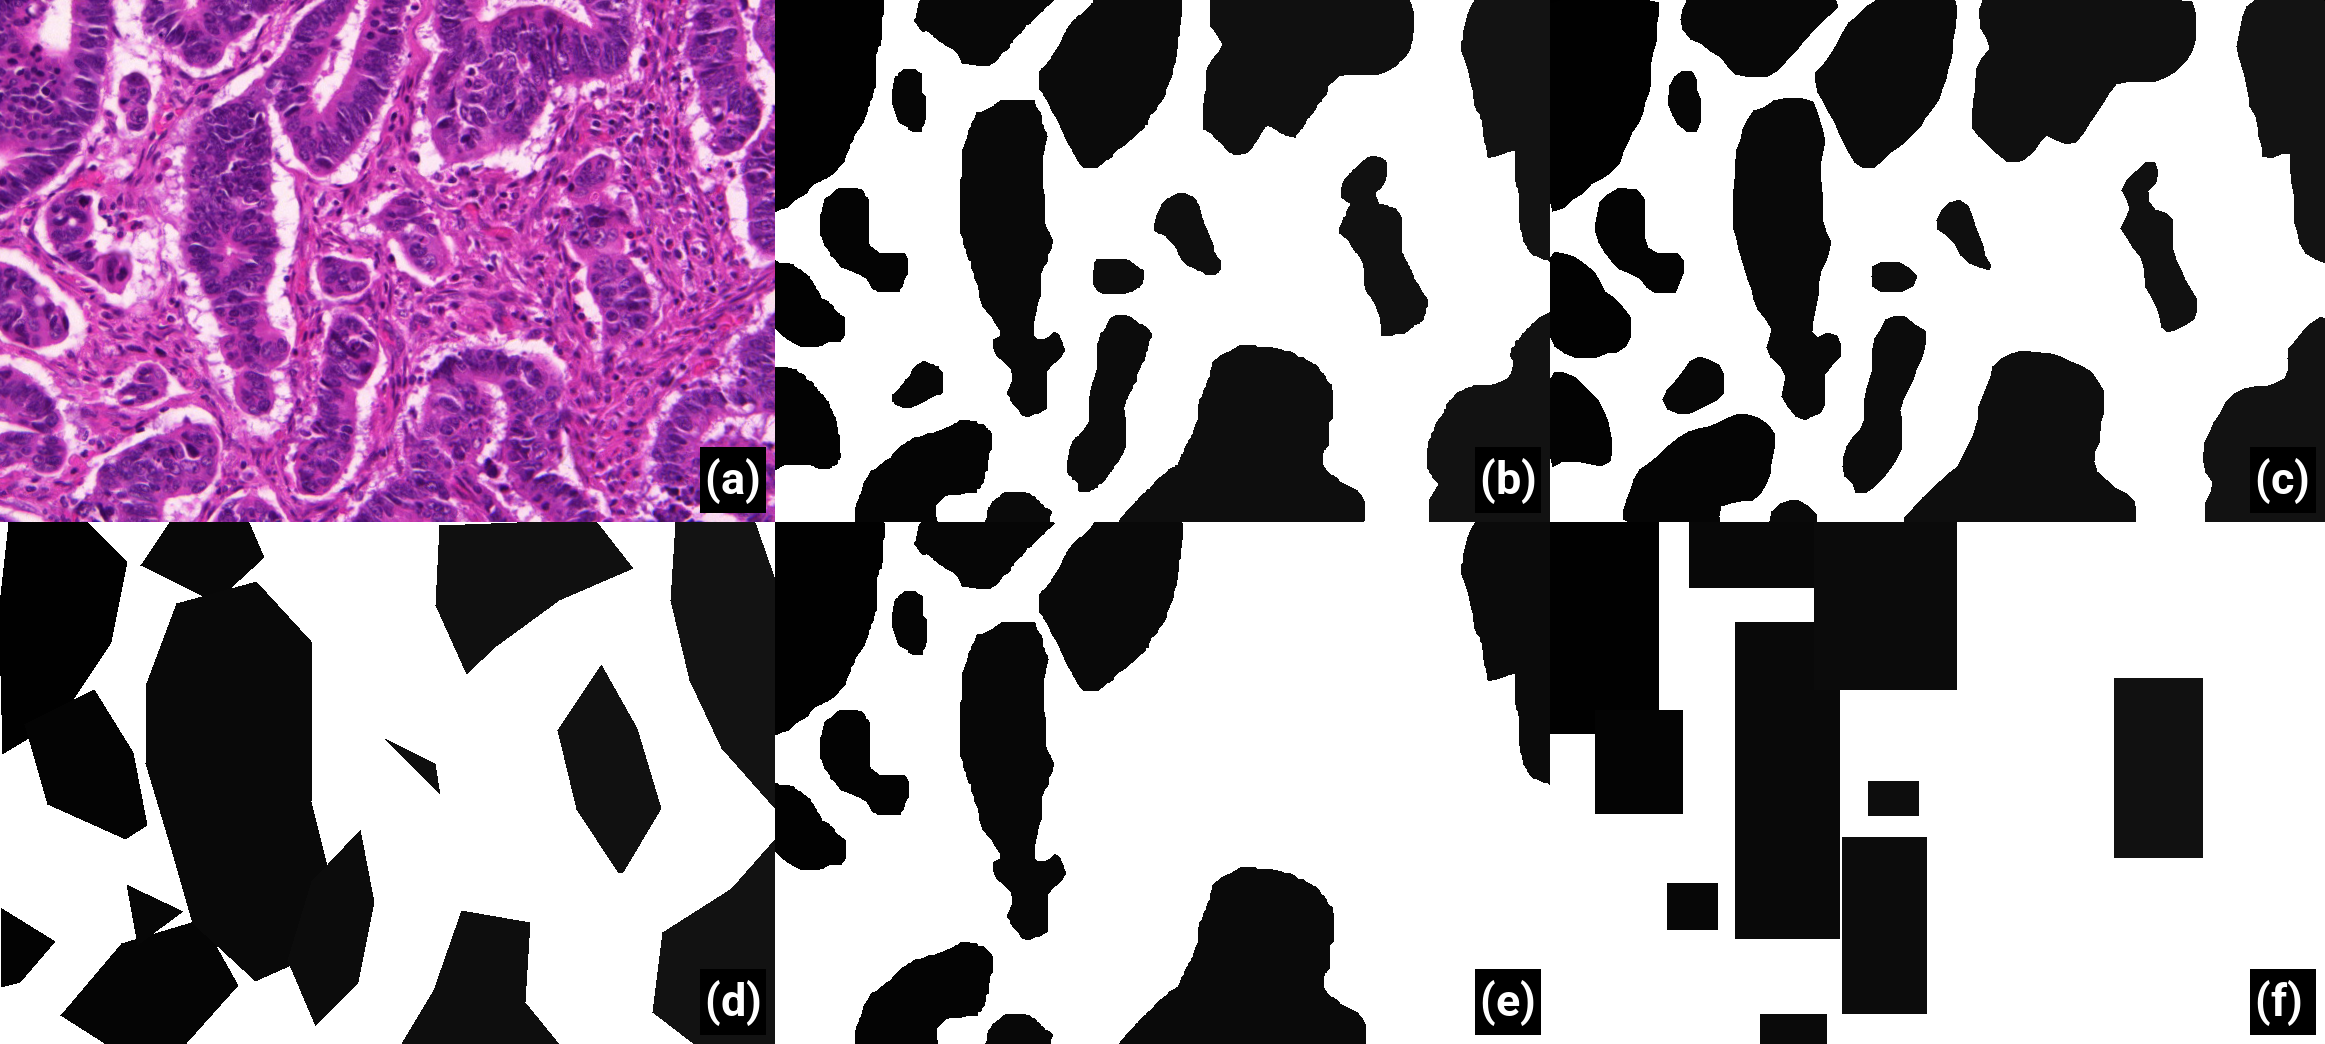 Examples of corrupted annotations generated on the GlaS dataset to simulate different levels of supervision and annotation effort. (a) Original image, (b) Original annotations, (c) Low contour deformations, (d) High contour deformations, (e) 50% Noise (i.e., 50% of the objects of interest are labelled as background), (f) 50% noise + Bounding Boxes.